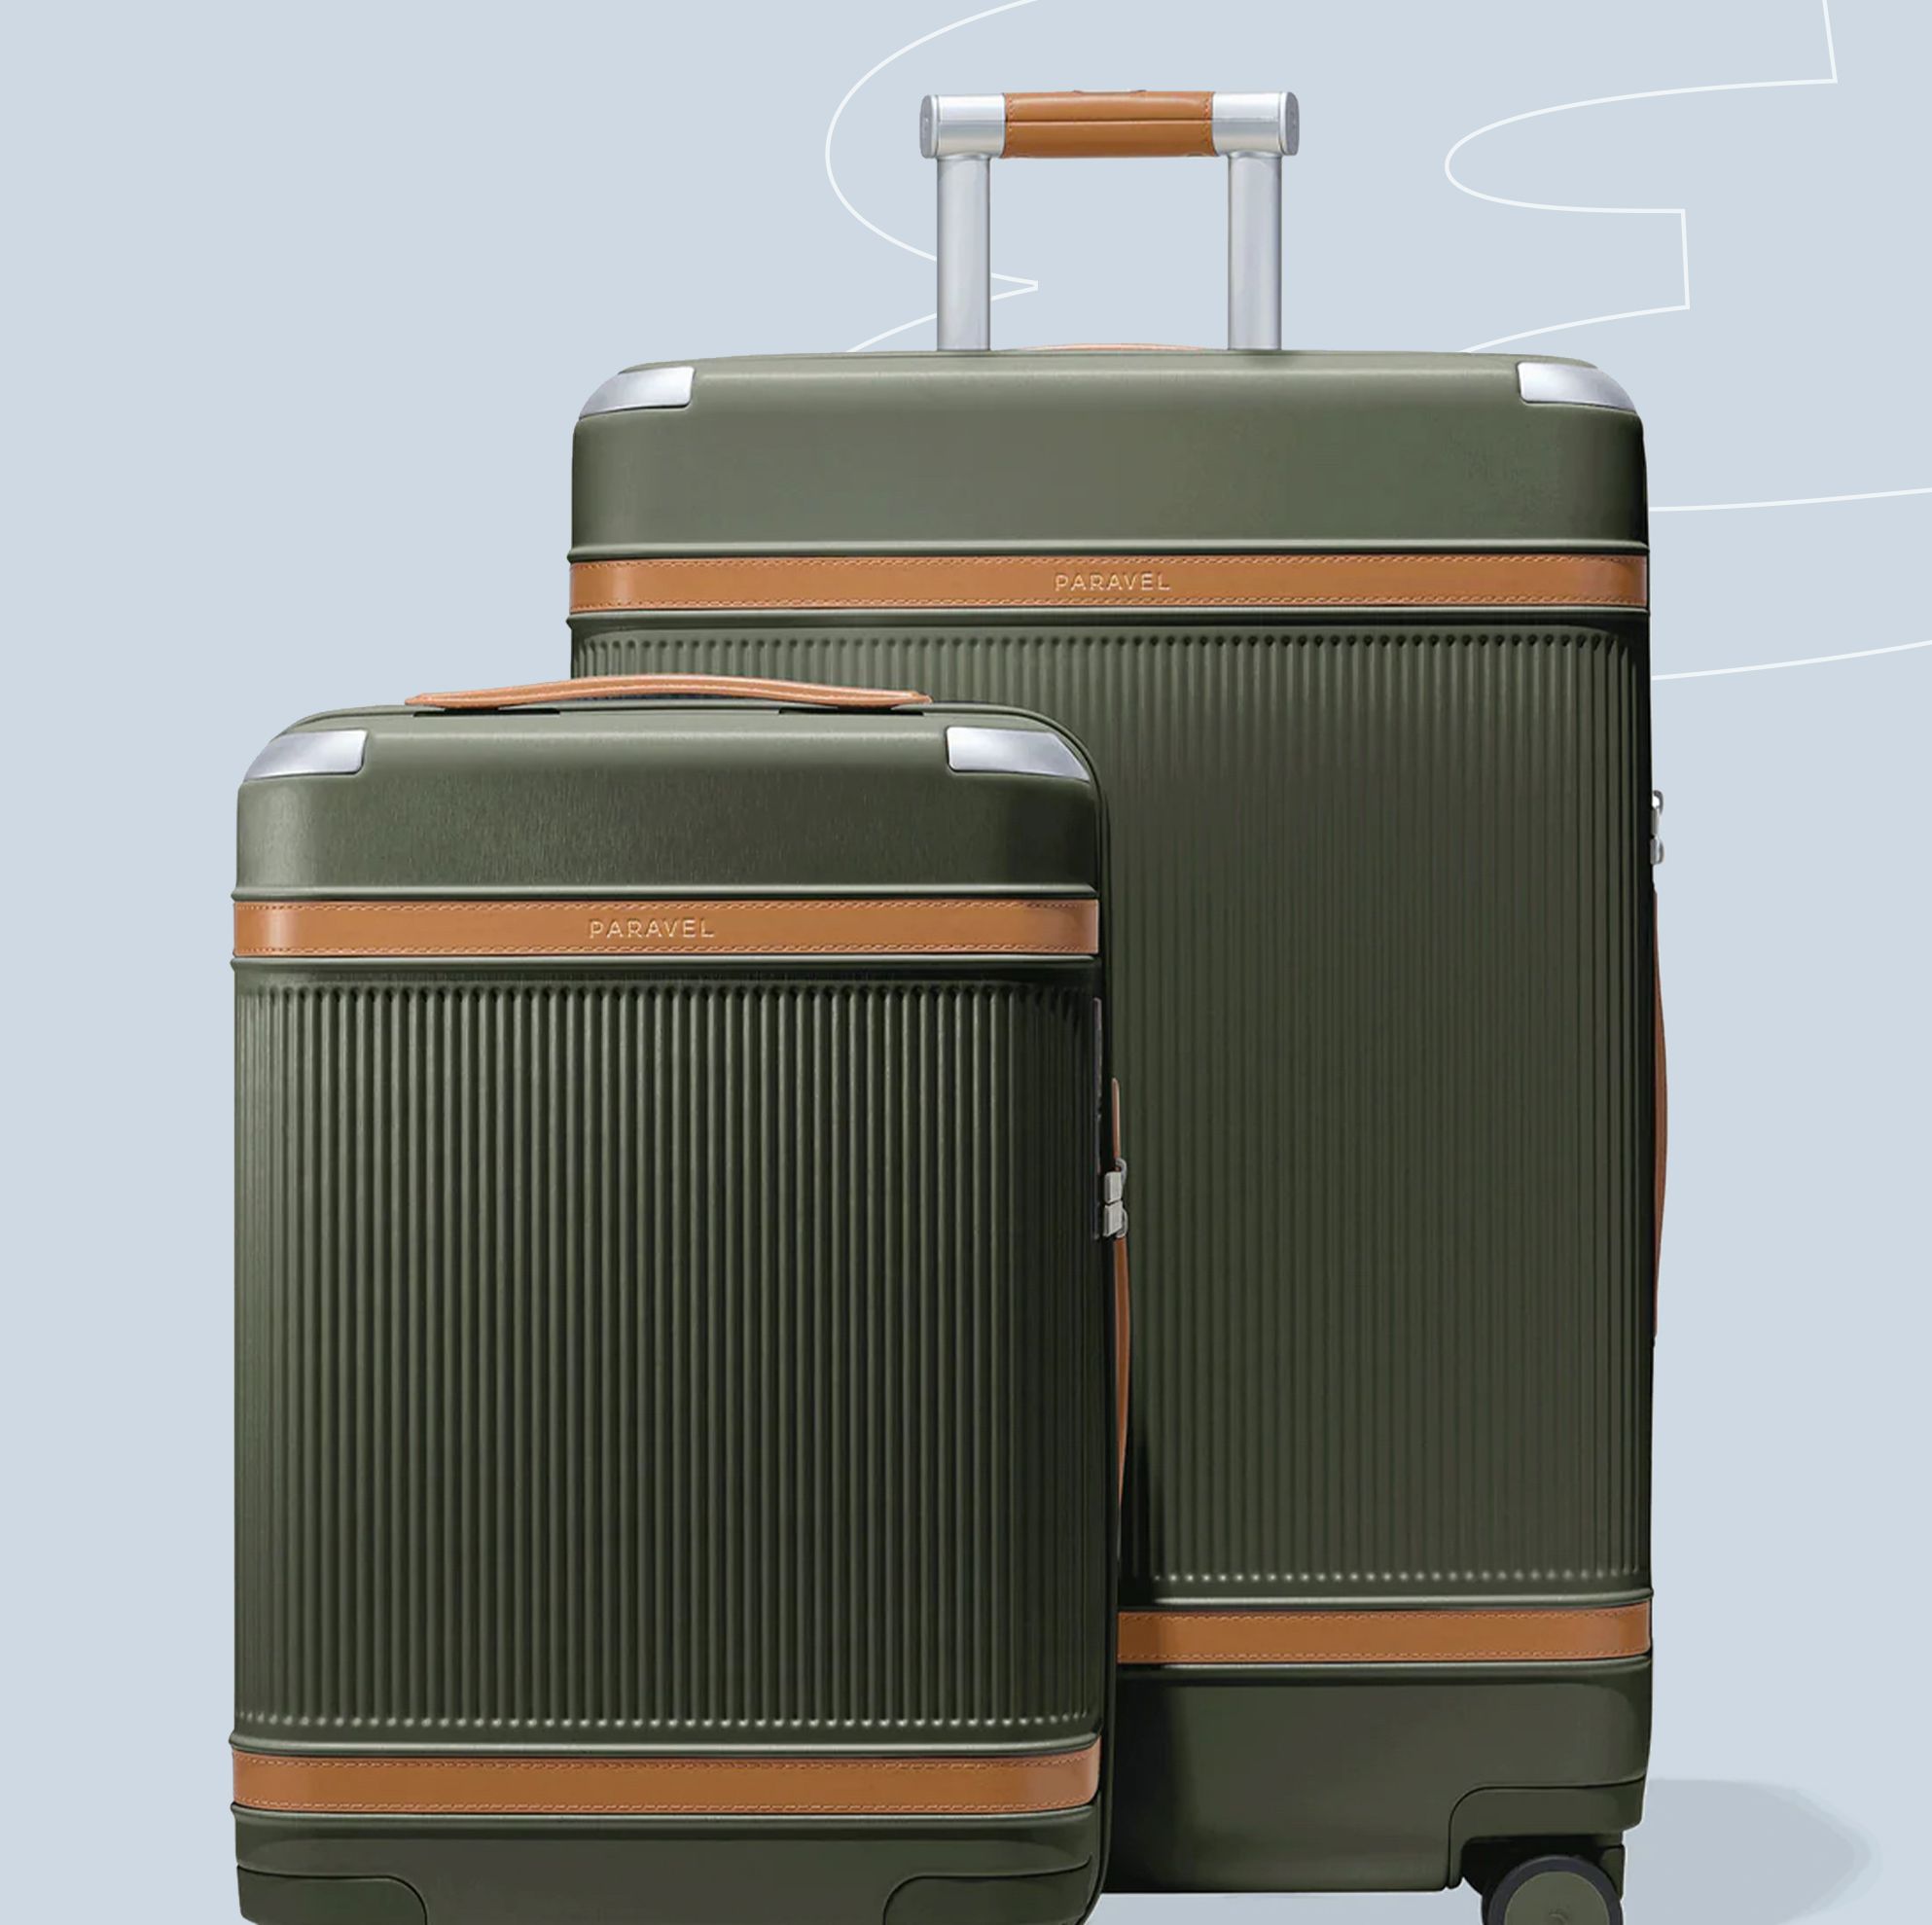 11 Great Luggage Sets for Smooth Traveling